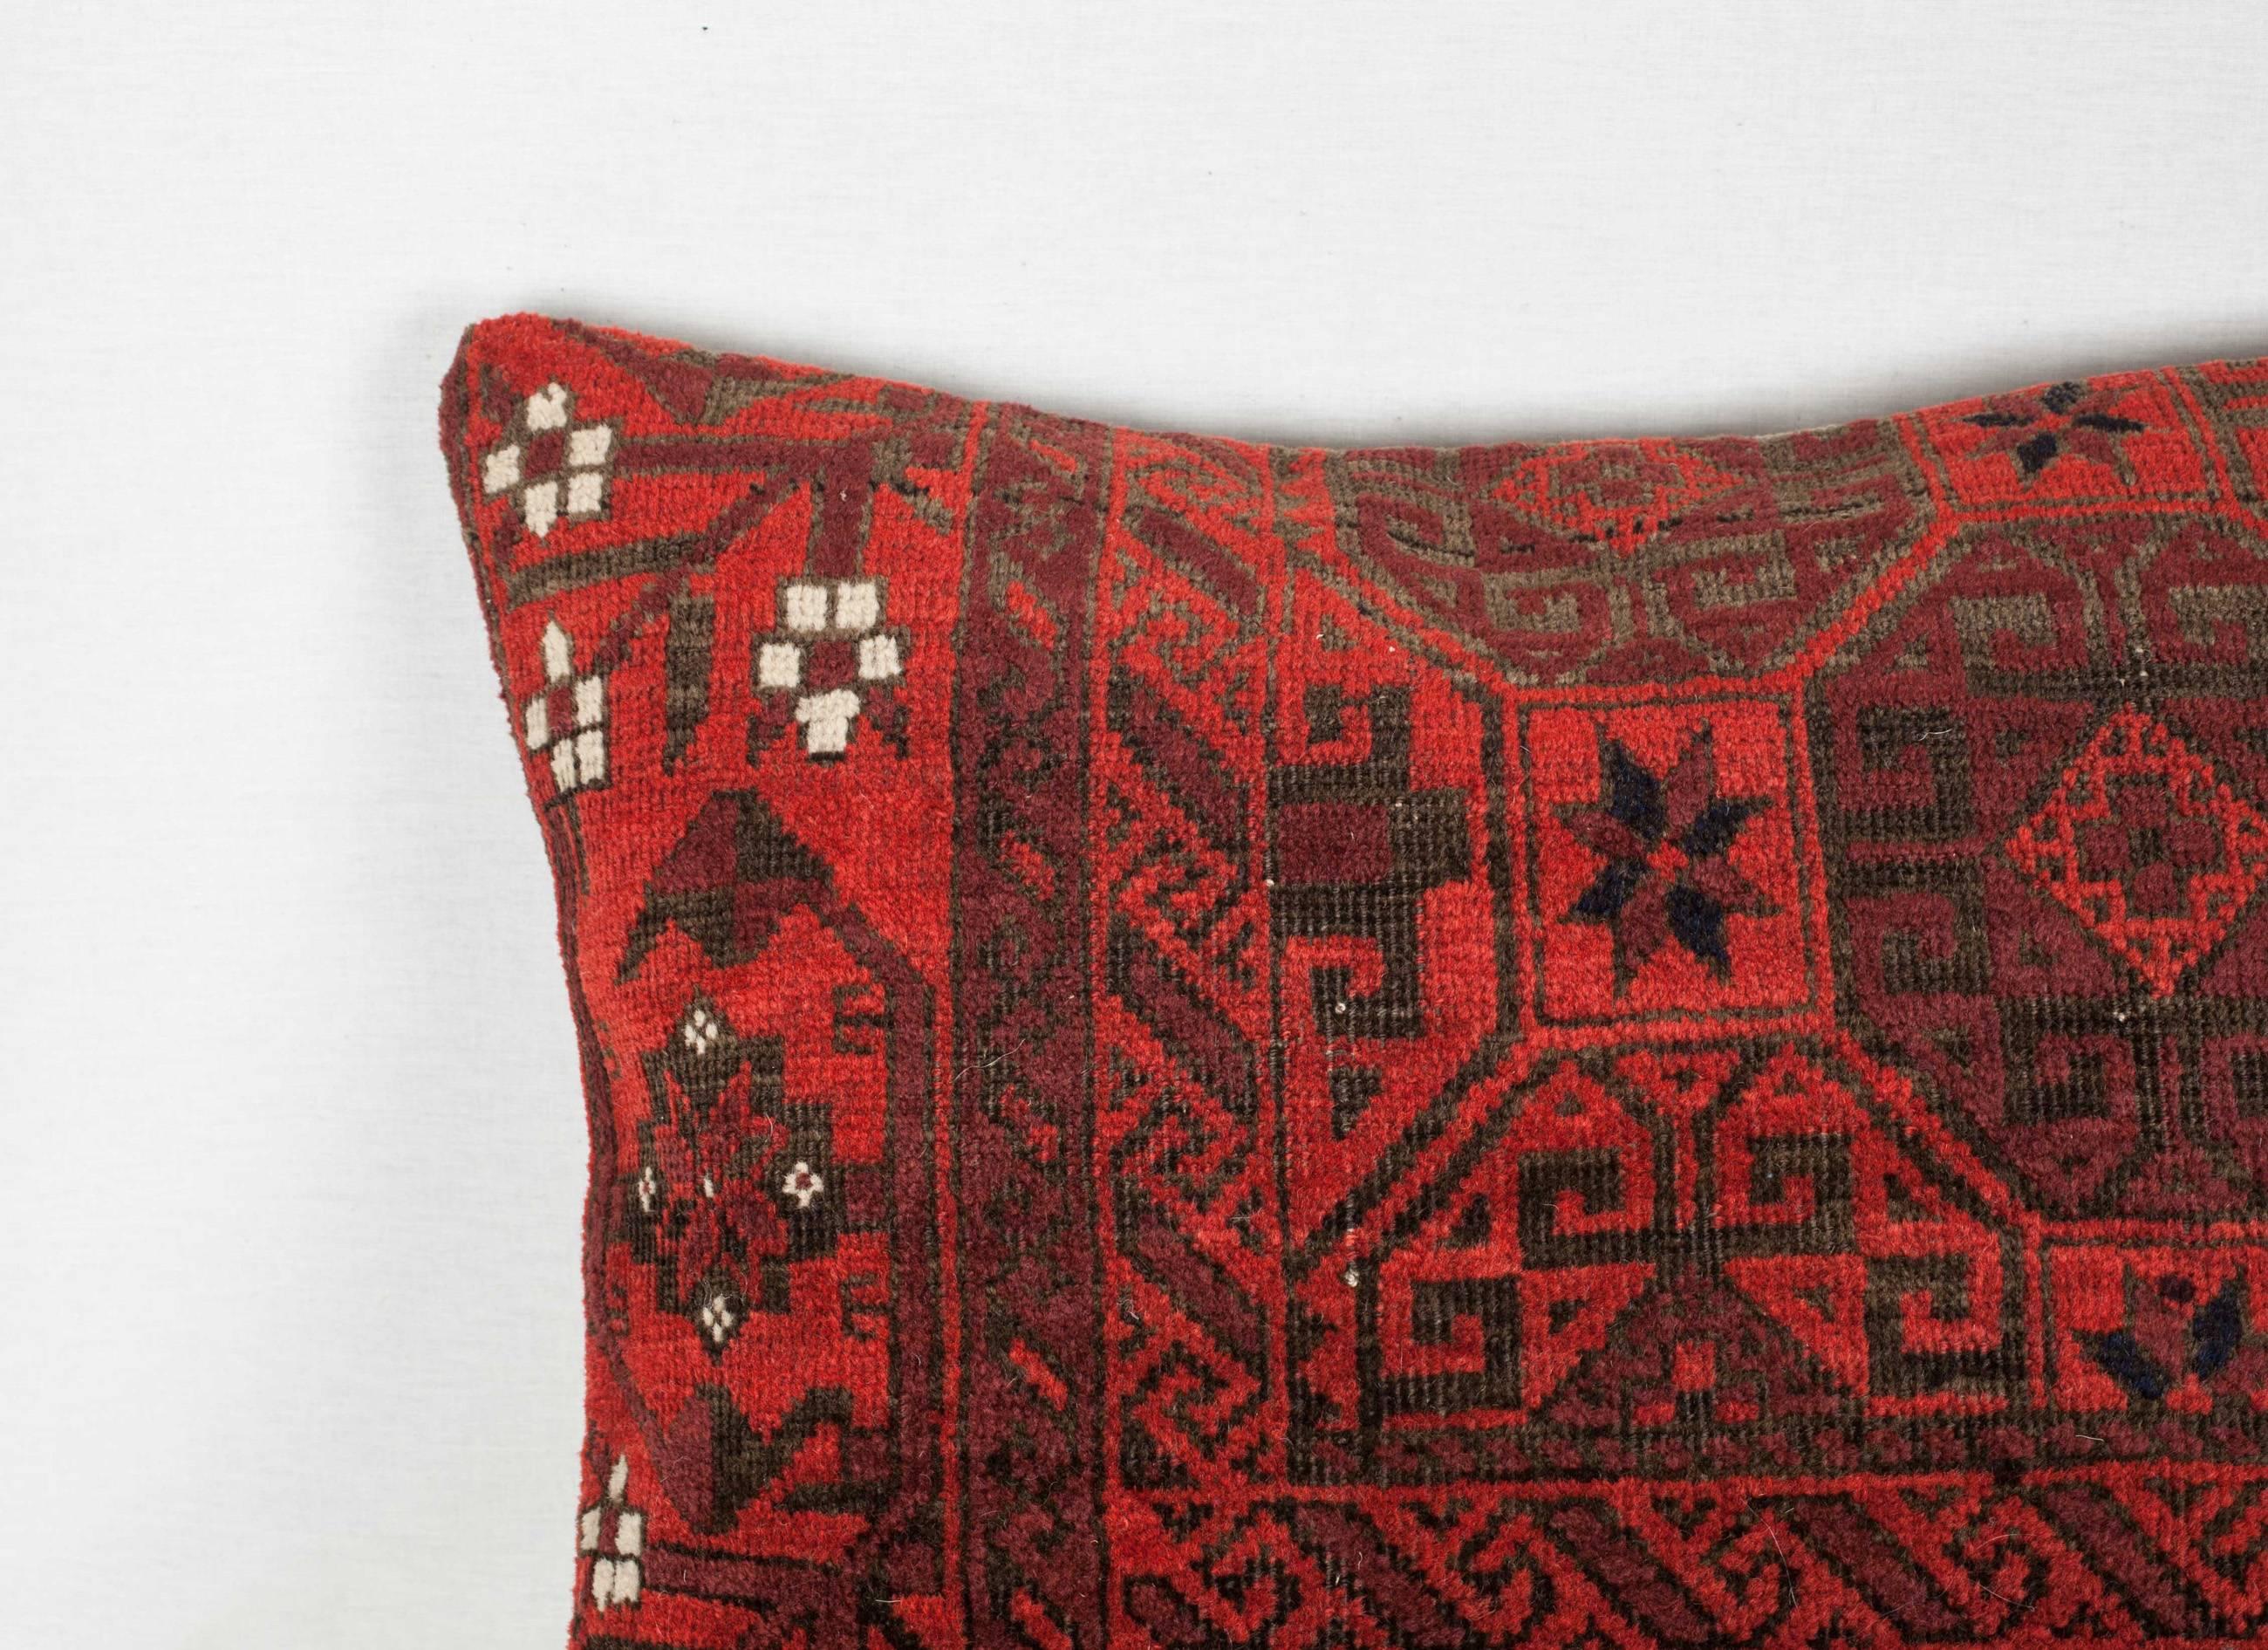 Linen Antique Baluch Persian Tribal Pillow, Unusual Design with Saturated Red Color